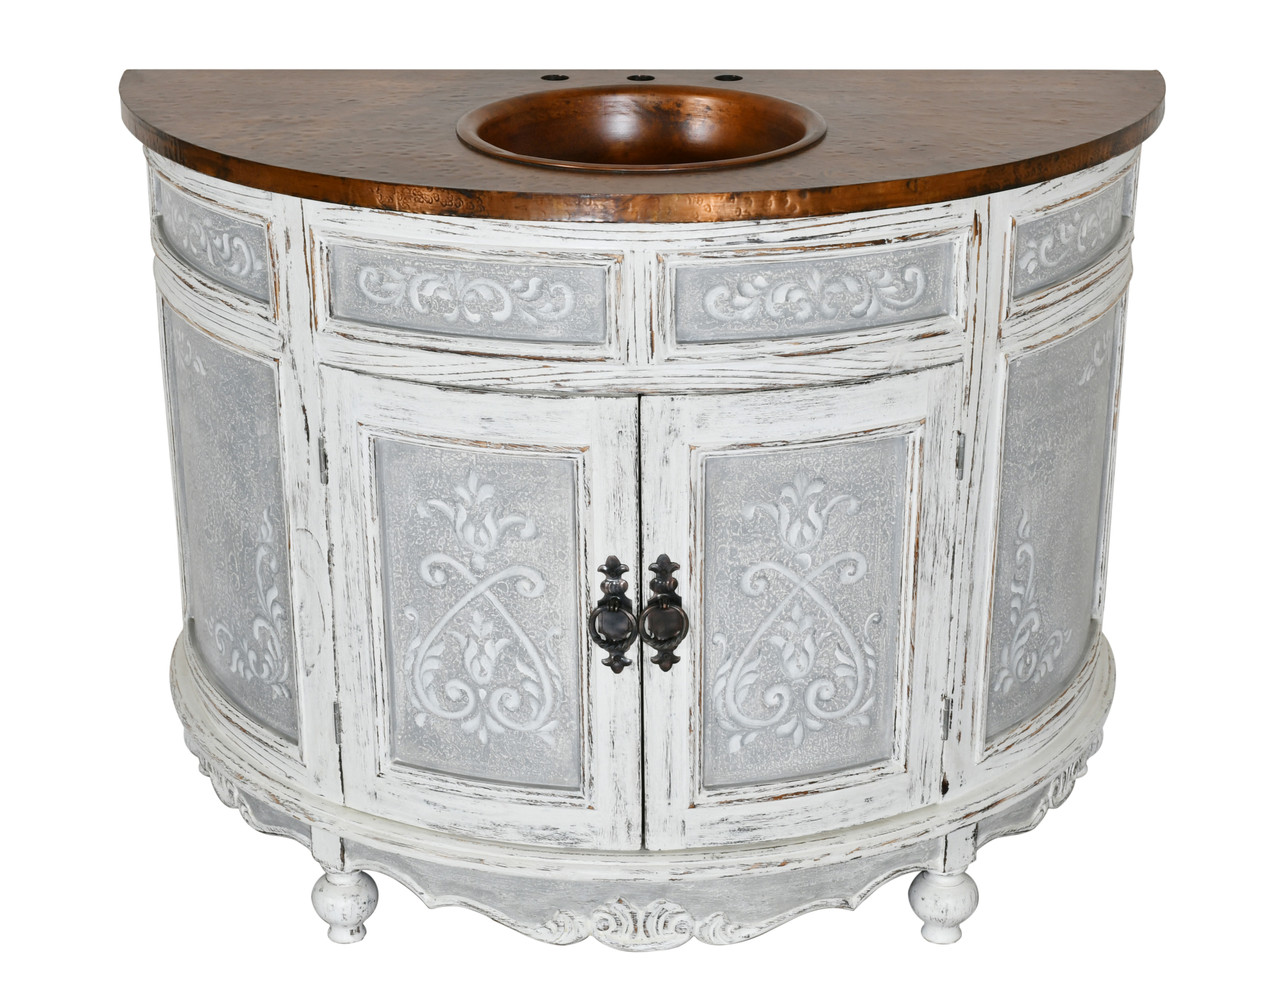 48 Handcrafted and Hand Painted, Powered White, Copper Top Peruvian Bath Vanity